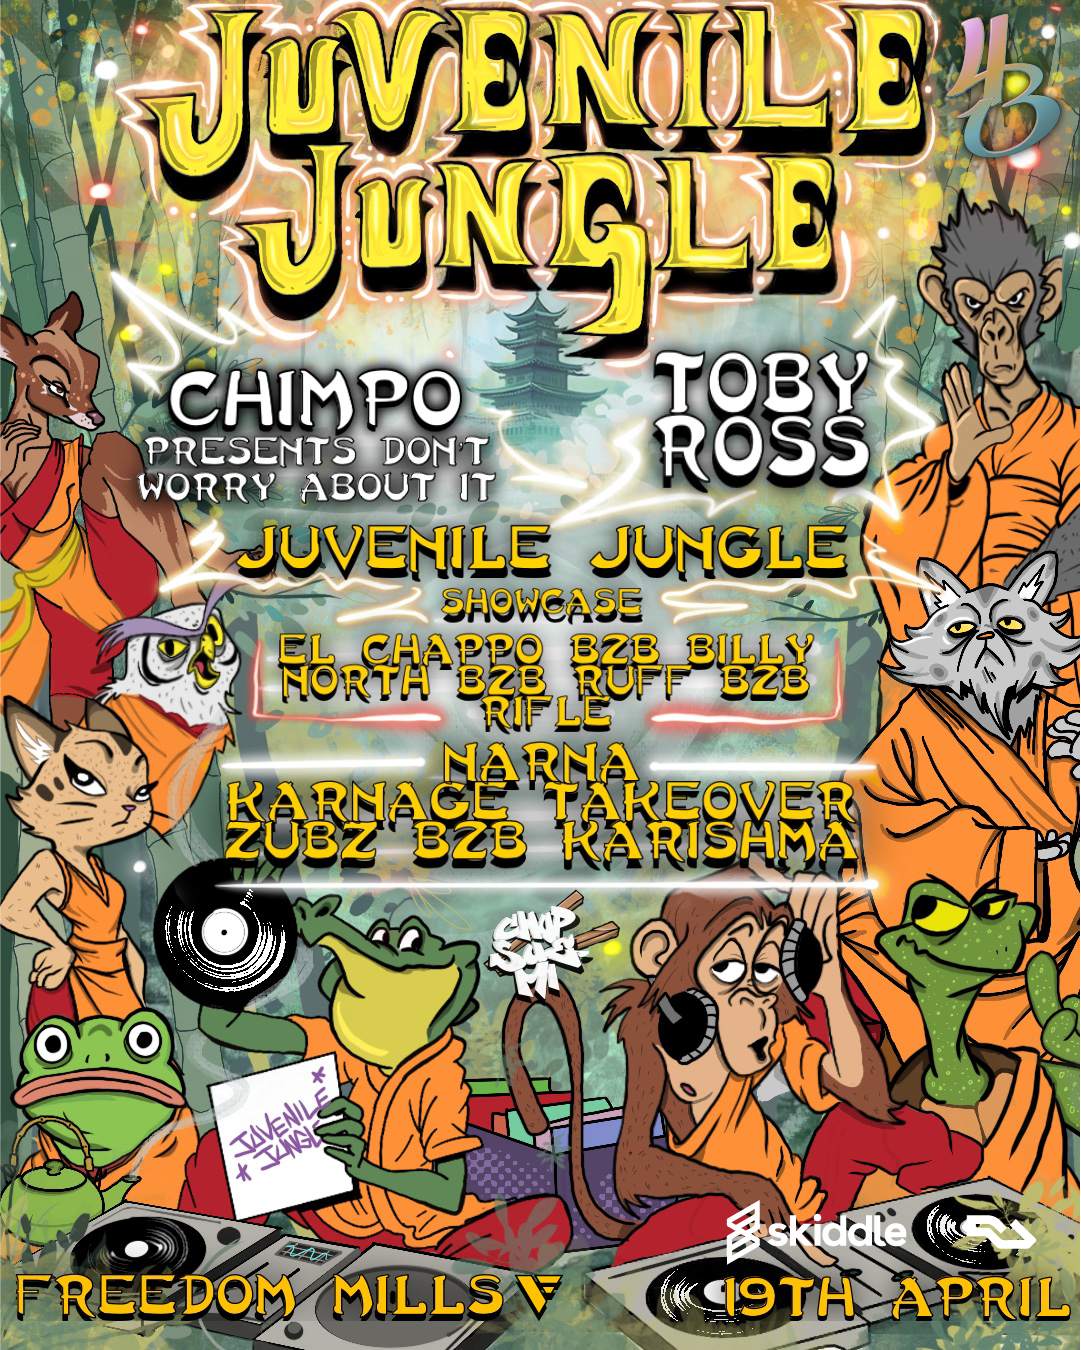 Juvenile Jungle presents: Chimpo, TOBY ROSS  - フライヤー表